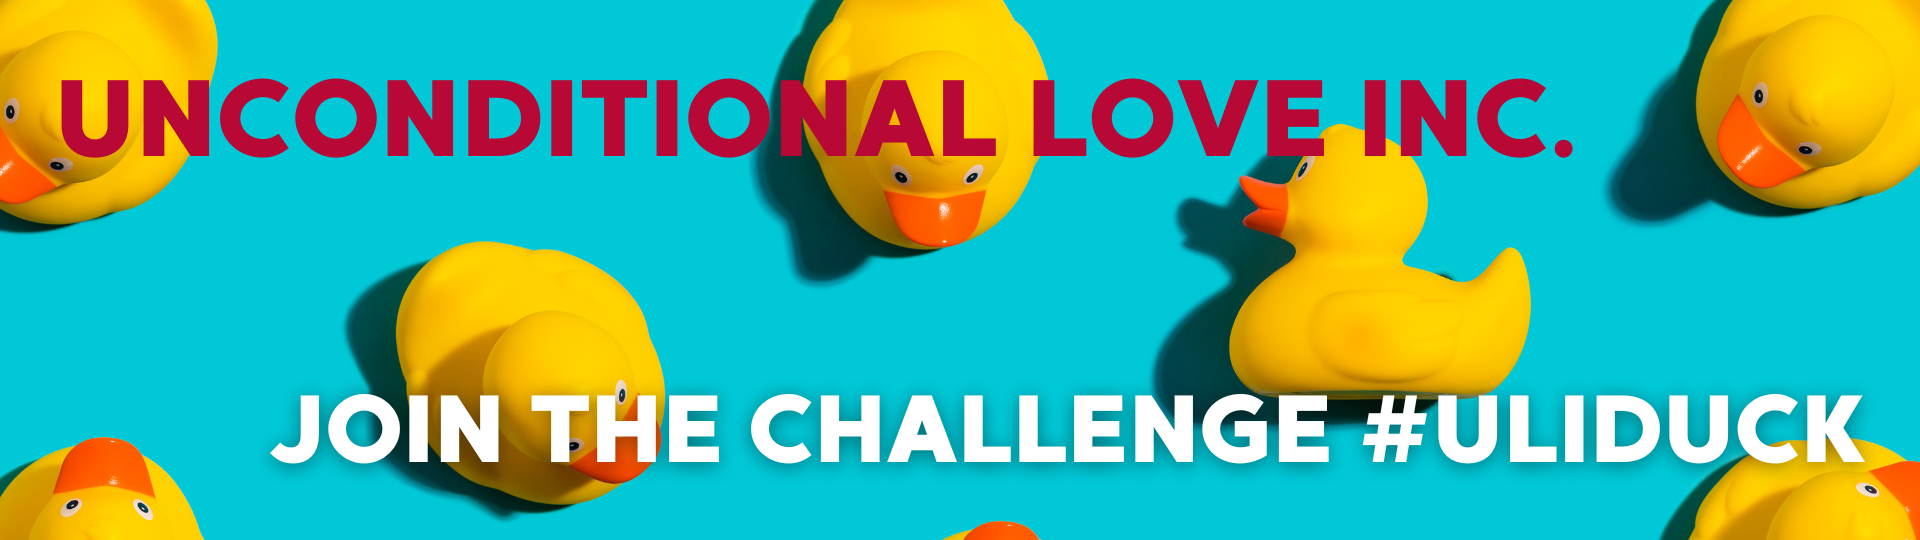 Unconditional Love Inc join the challenge